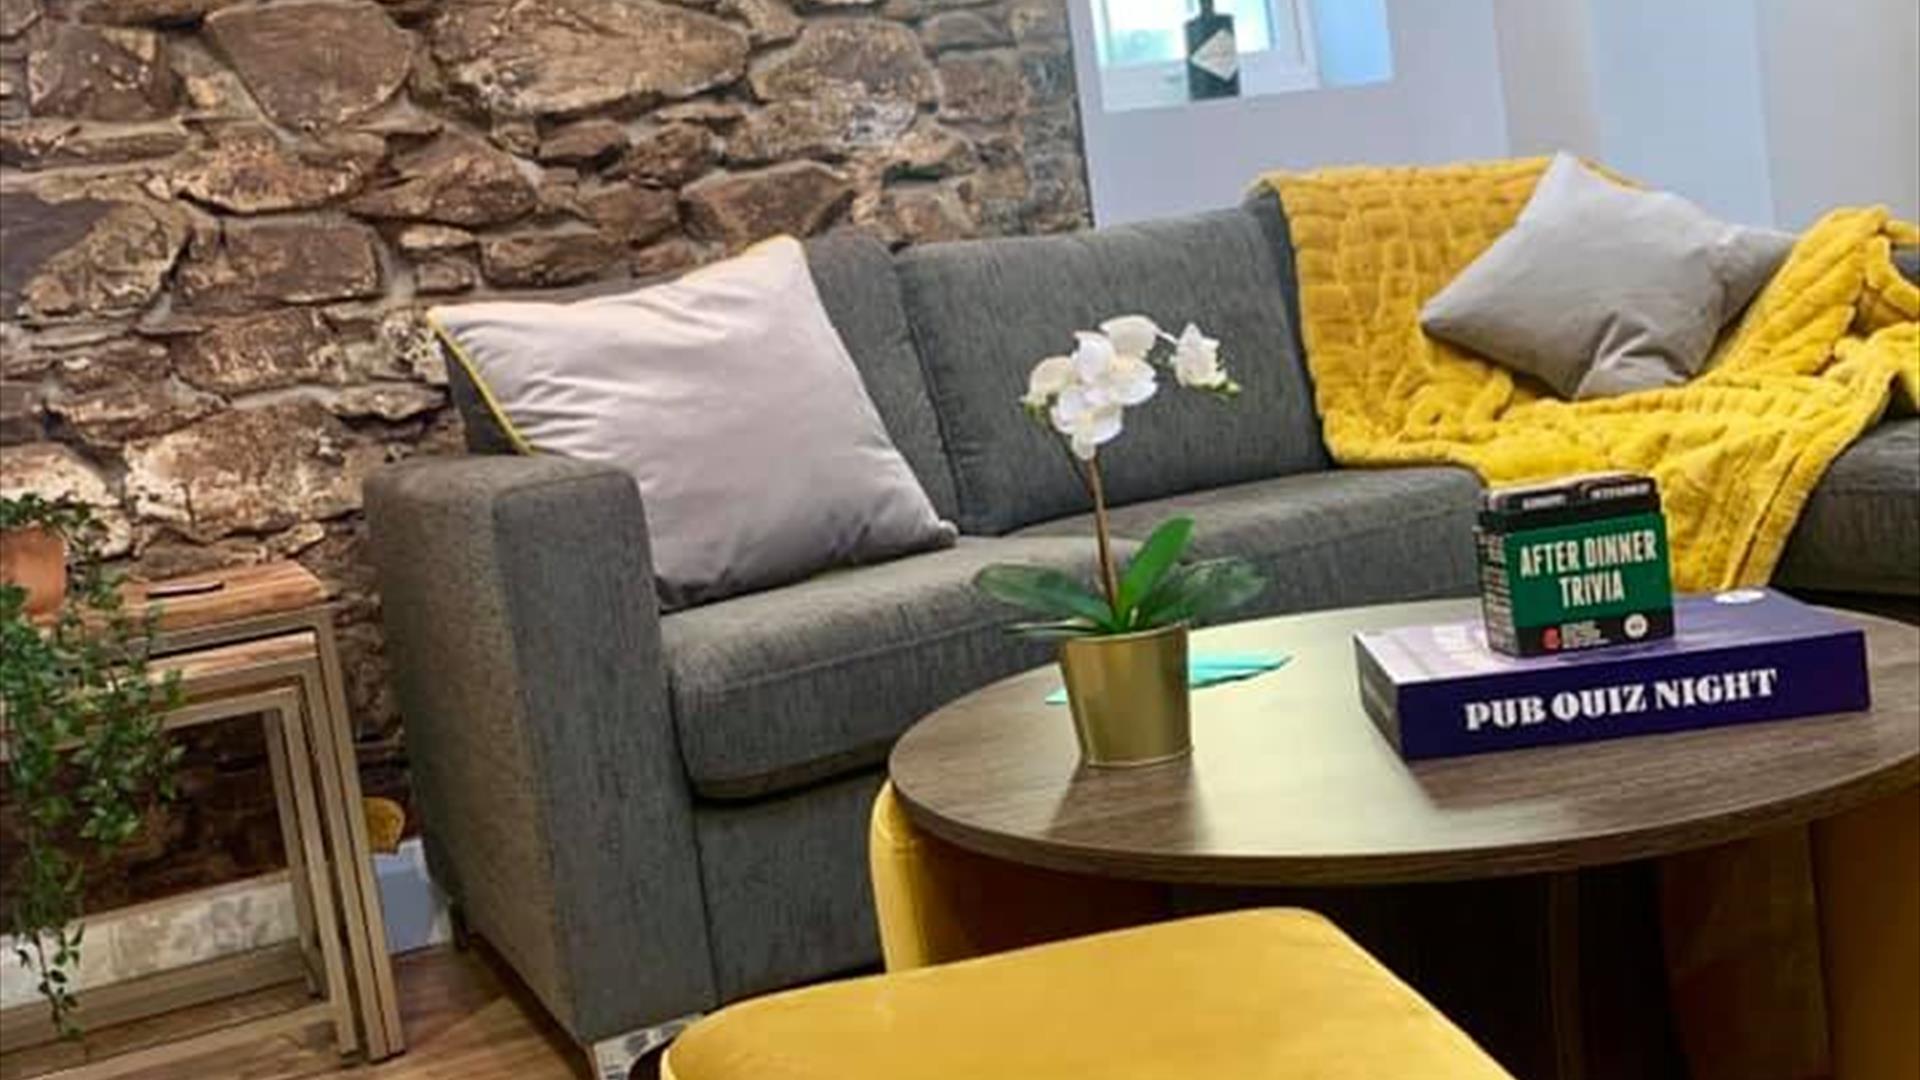 Image shows lounge area with sofa, foot stool, exposed brick wall with 2 clocks showing the time in Comber and New York. Wooden flooring and coffee ta